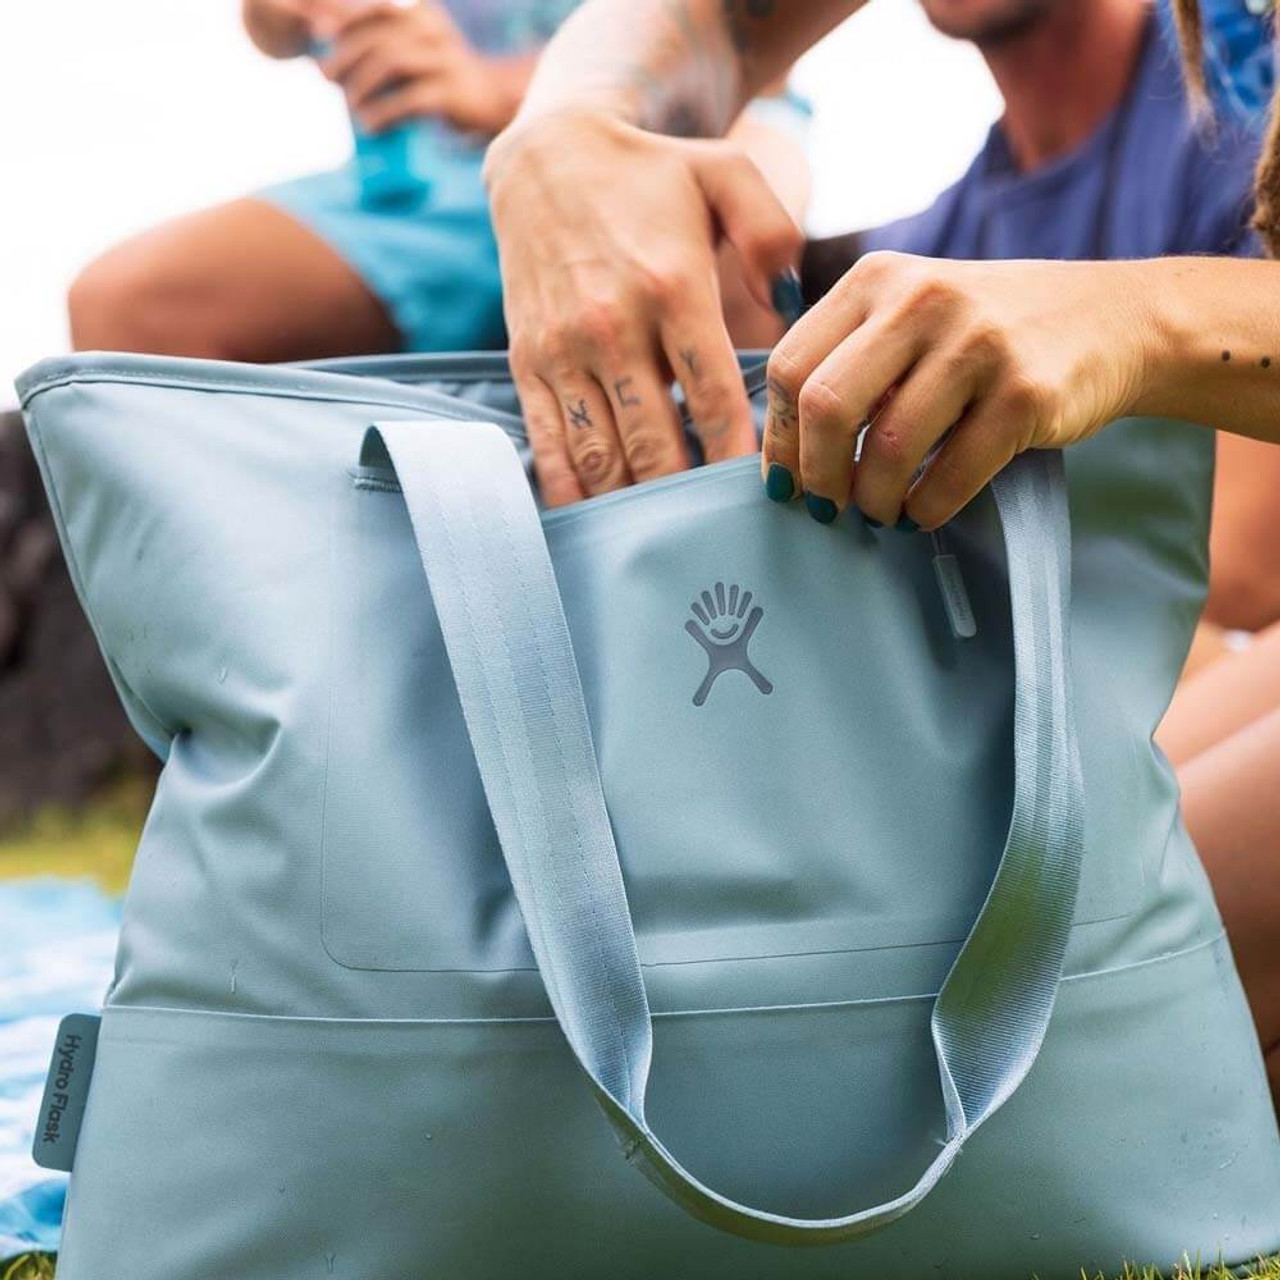 https://cdn11.bigcommerce.com/s-zut1msomd6/images/stencil/1280x1280/products/27627/213030/hydroflask-GT20-20-L-insulated-tote-baltic-blue-lifestyle-closeup__98964.1651092246.jpg?c=1